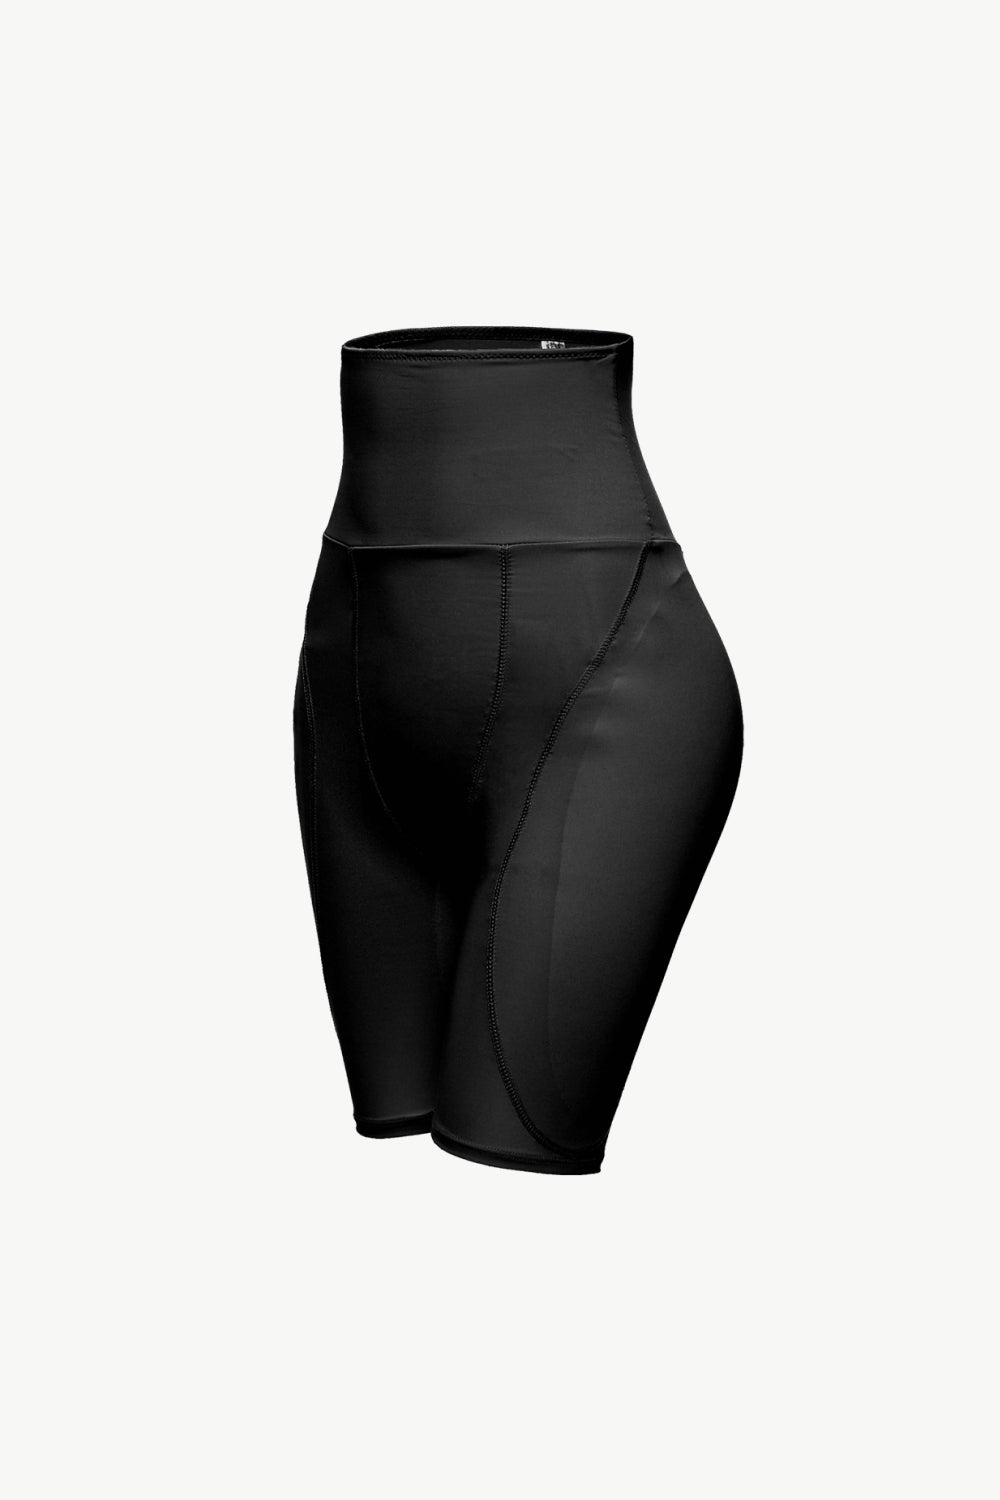 Full Size High Waisted Pull-On Shaping Shorts - DromedarShop.com Online Boutique